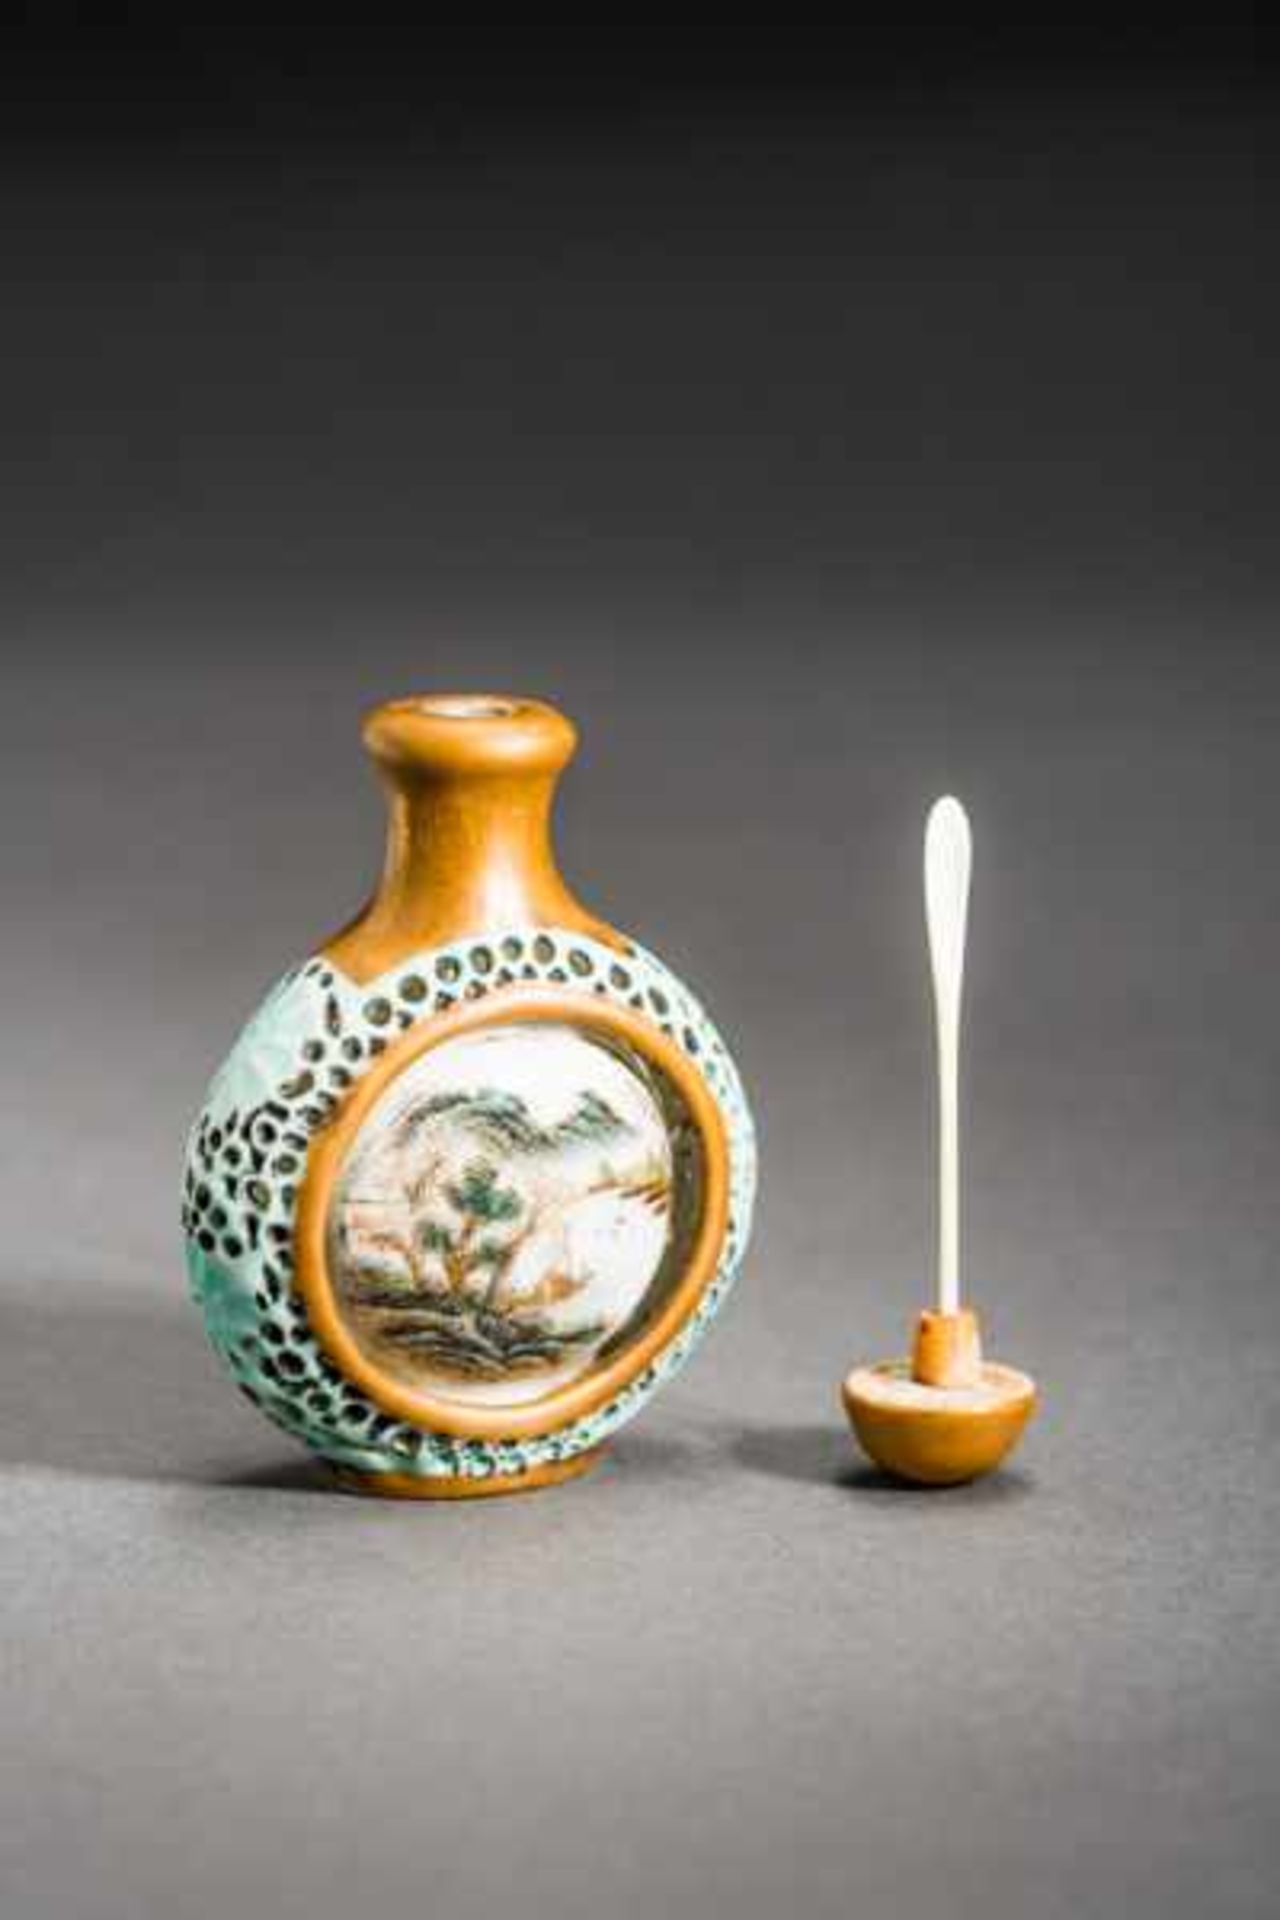 SHANSHUI LANDSCAPE AND POEM Porcelain with paint. Stopper: gilded porcelain, ivory spoon. China, - Image 6 of 6